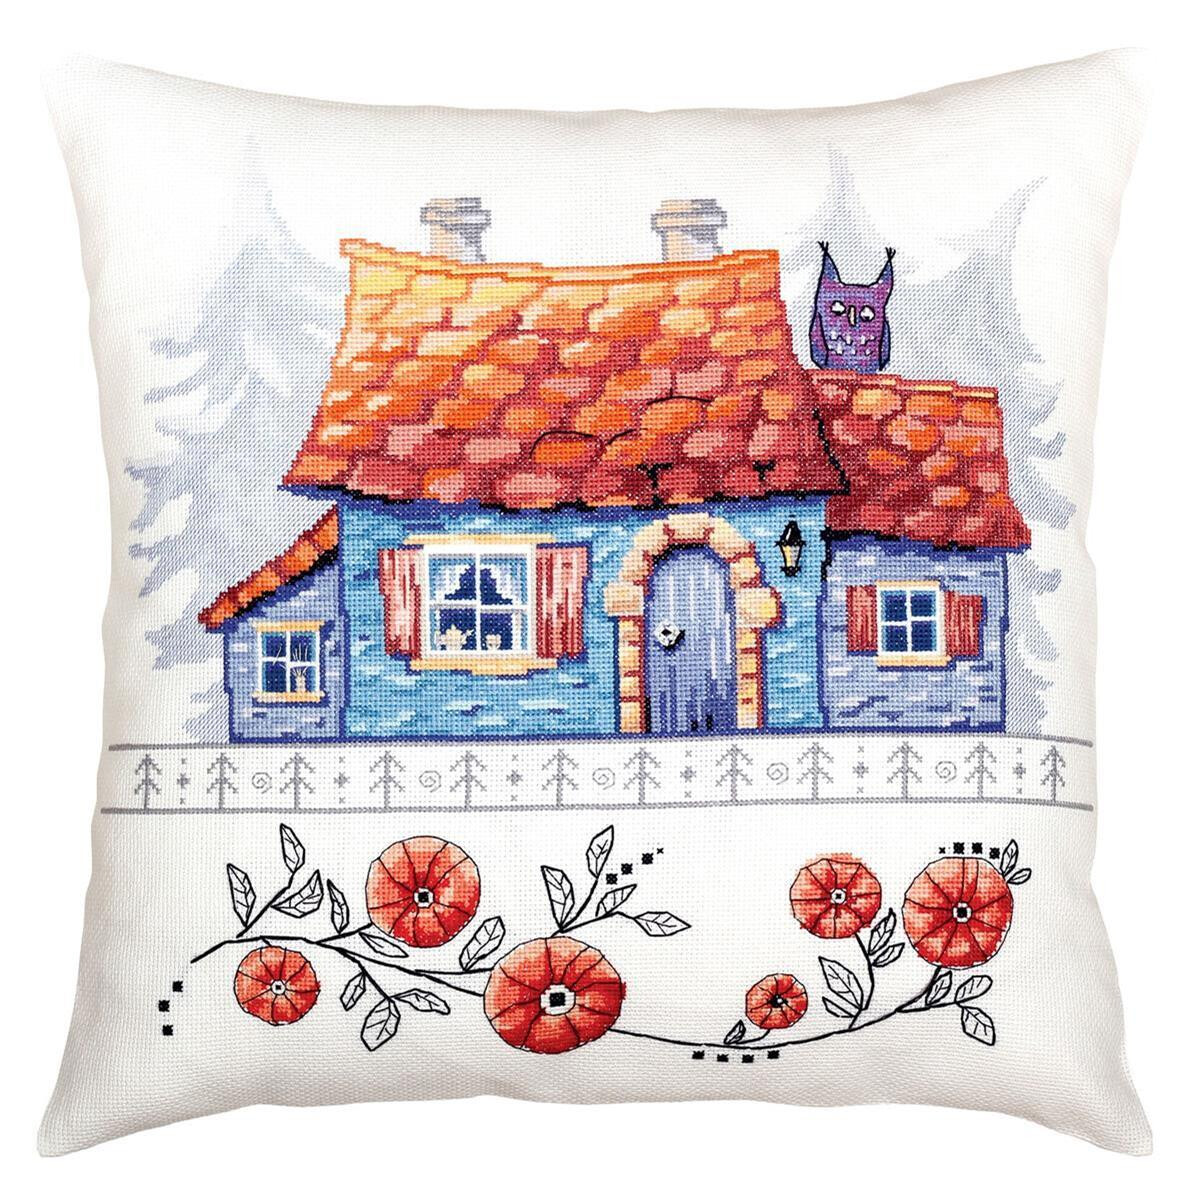 RTO counted Cross Stitch Kit cushion "Lodge in the...